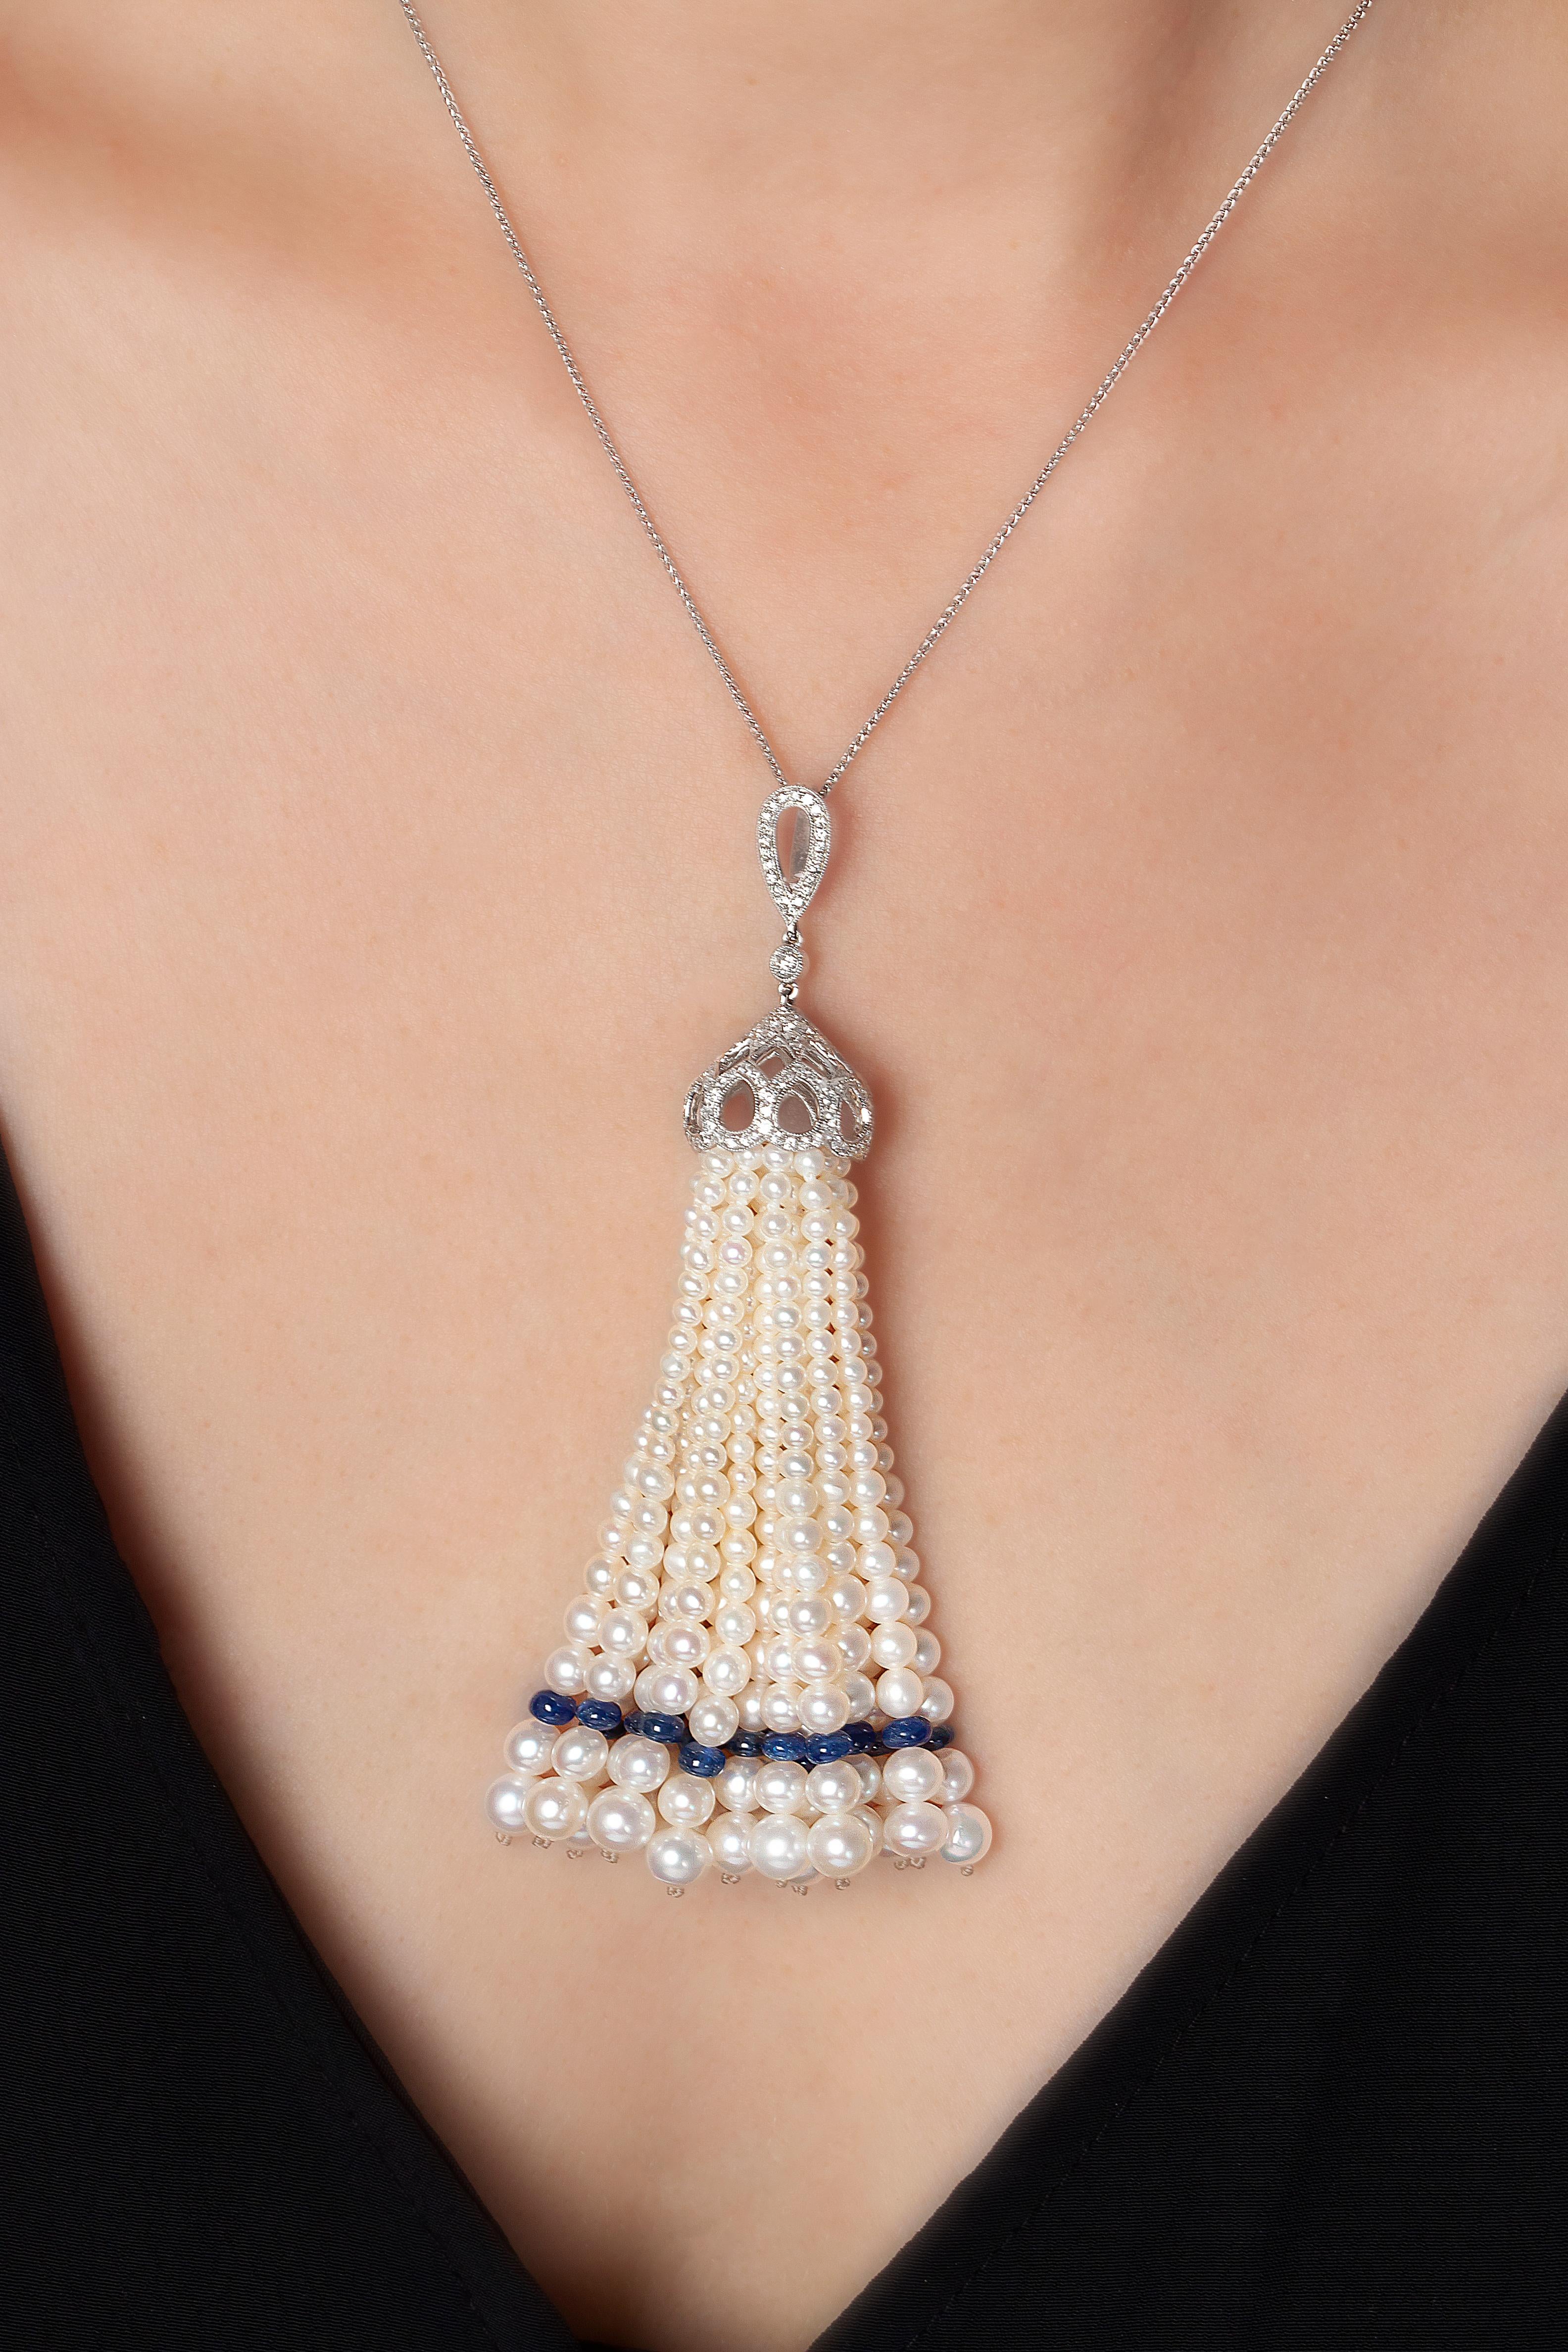 This enchanting pendant by Yoko London features a Freshwater pearl tassel, completed with vibrant Sapphire rondelles. The striking tassel sits beneath an ornate arrangement of diamonds; a design that has been meticulously crafted in our London